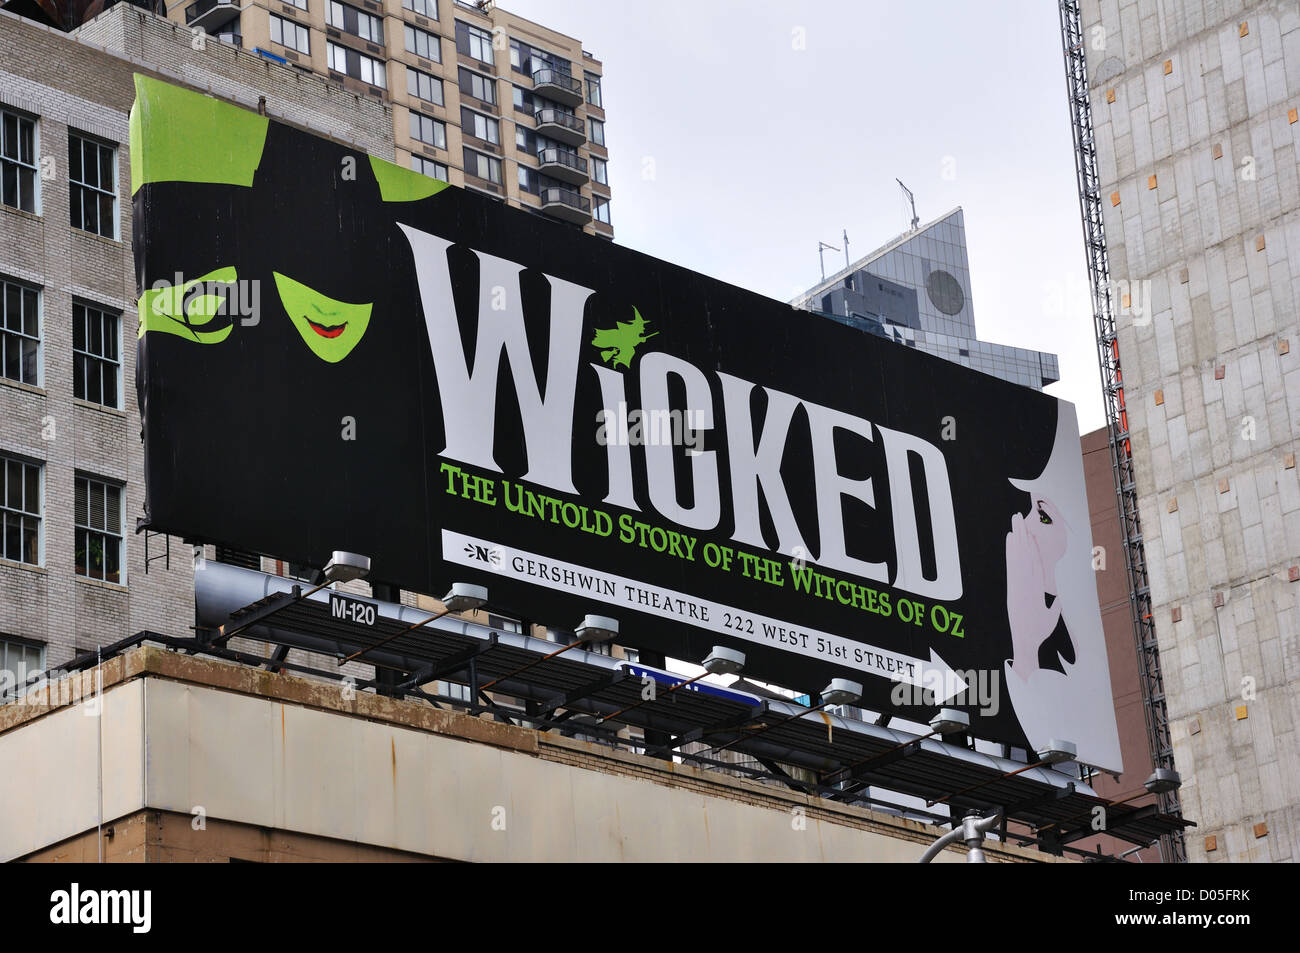 Gershwin Theater and the Wicked show, Wicked, New York City, USA Stock Photo